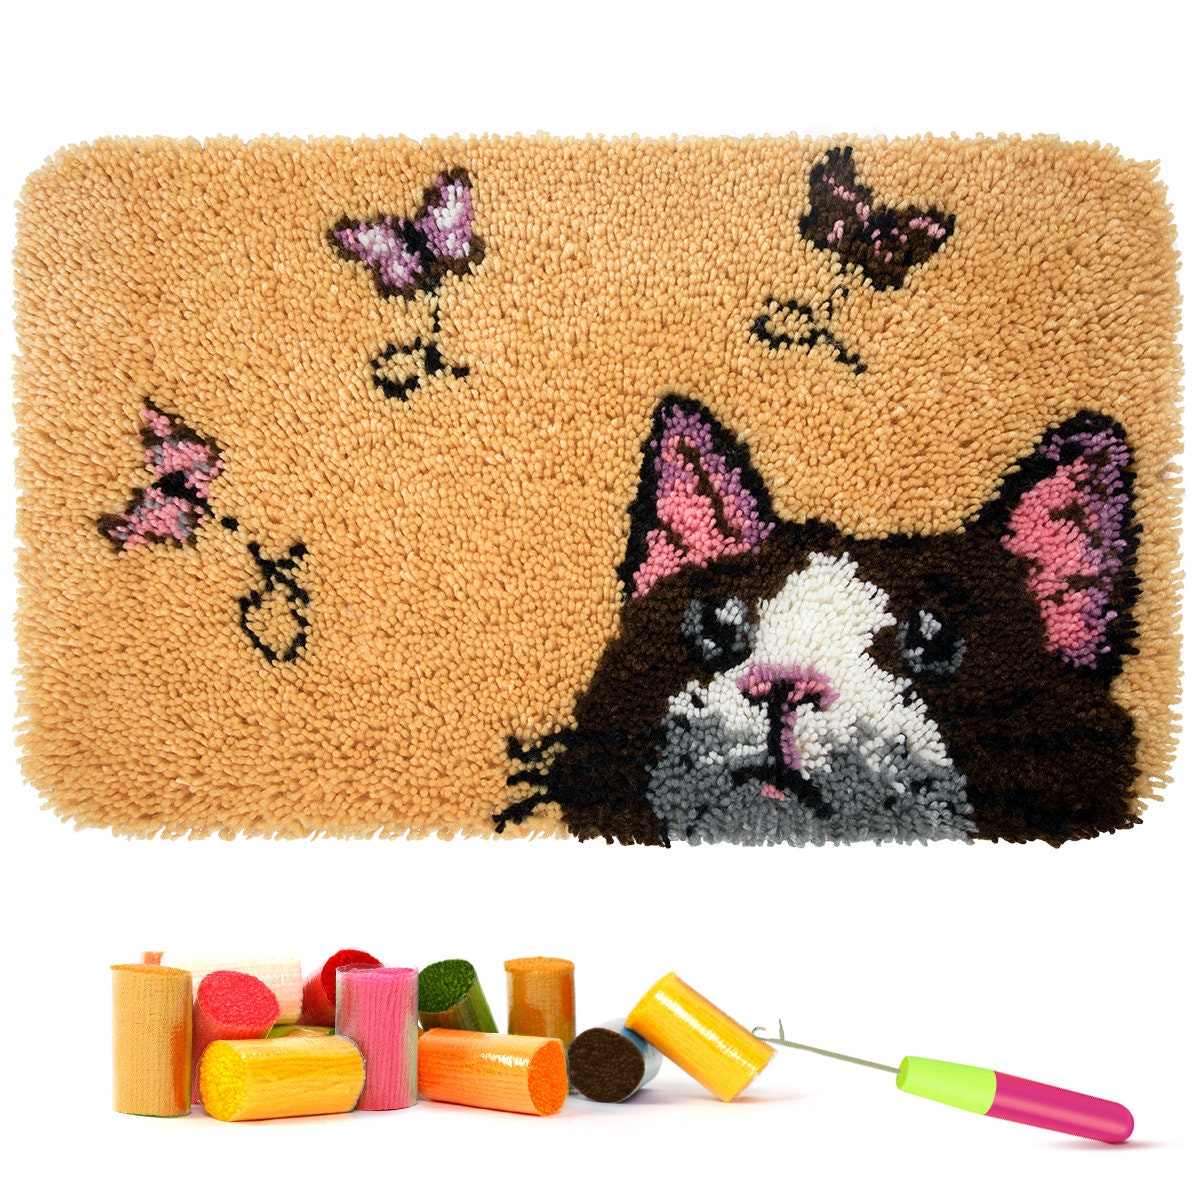 Latch Hook Rug Kits for Adults Kids DIY Rug Crochet Yarn Kits Tapestry Kits Butterfly Rug Making Kits with Printed Canvas Carpet Needlework Doormat